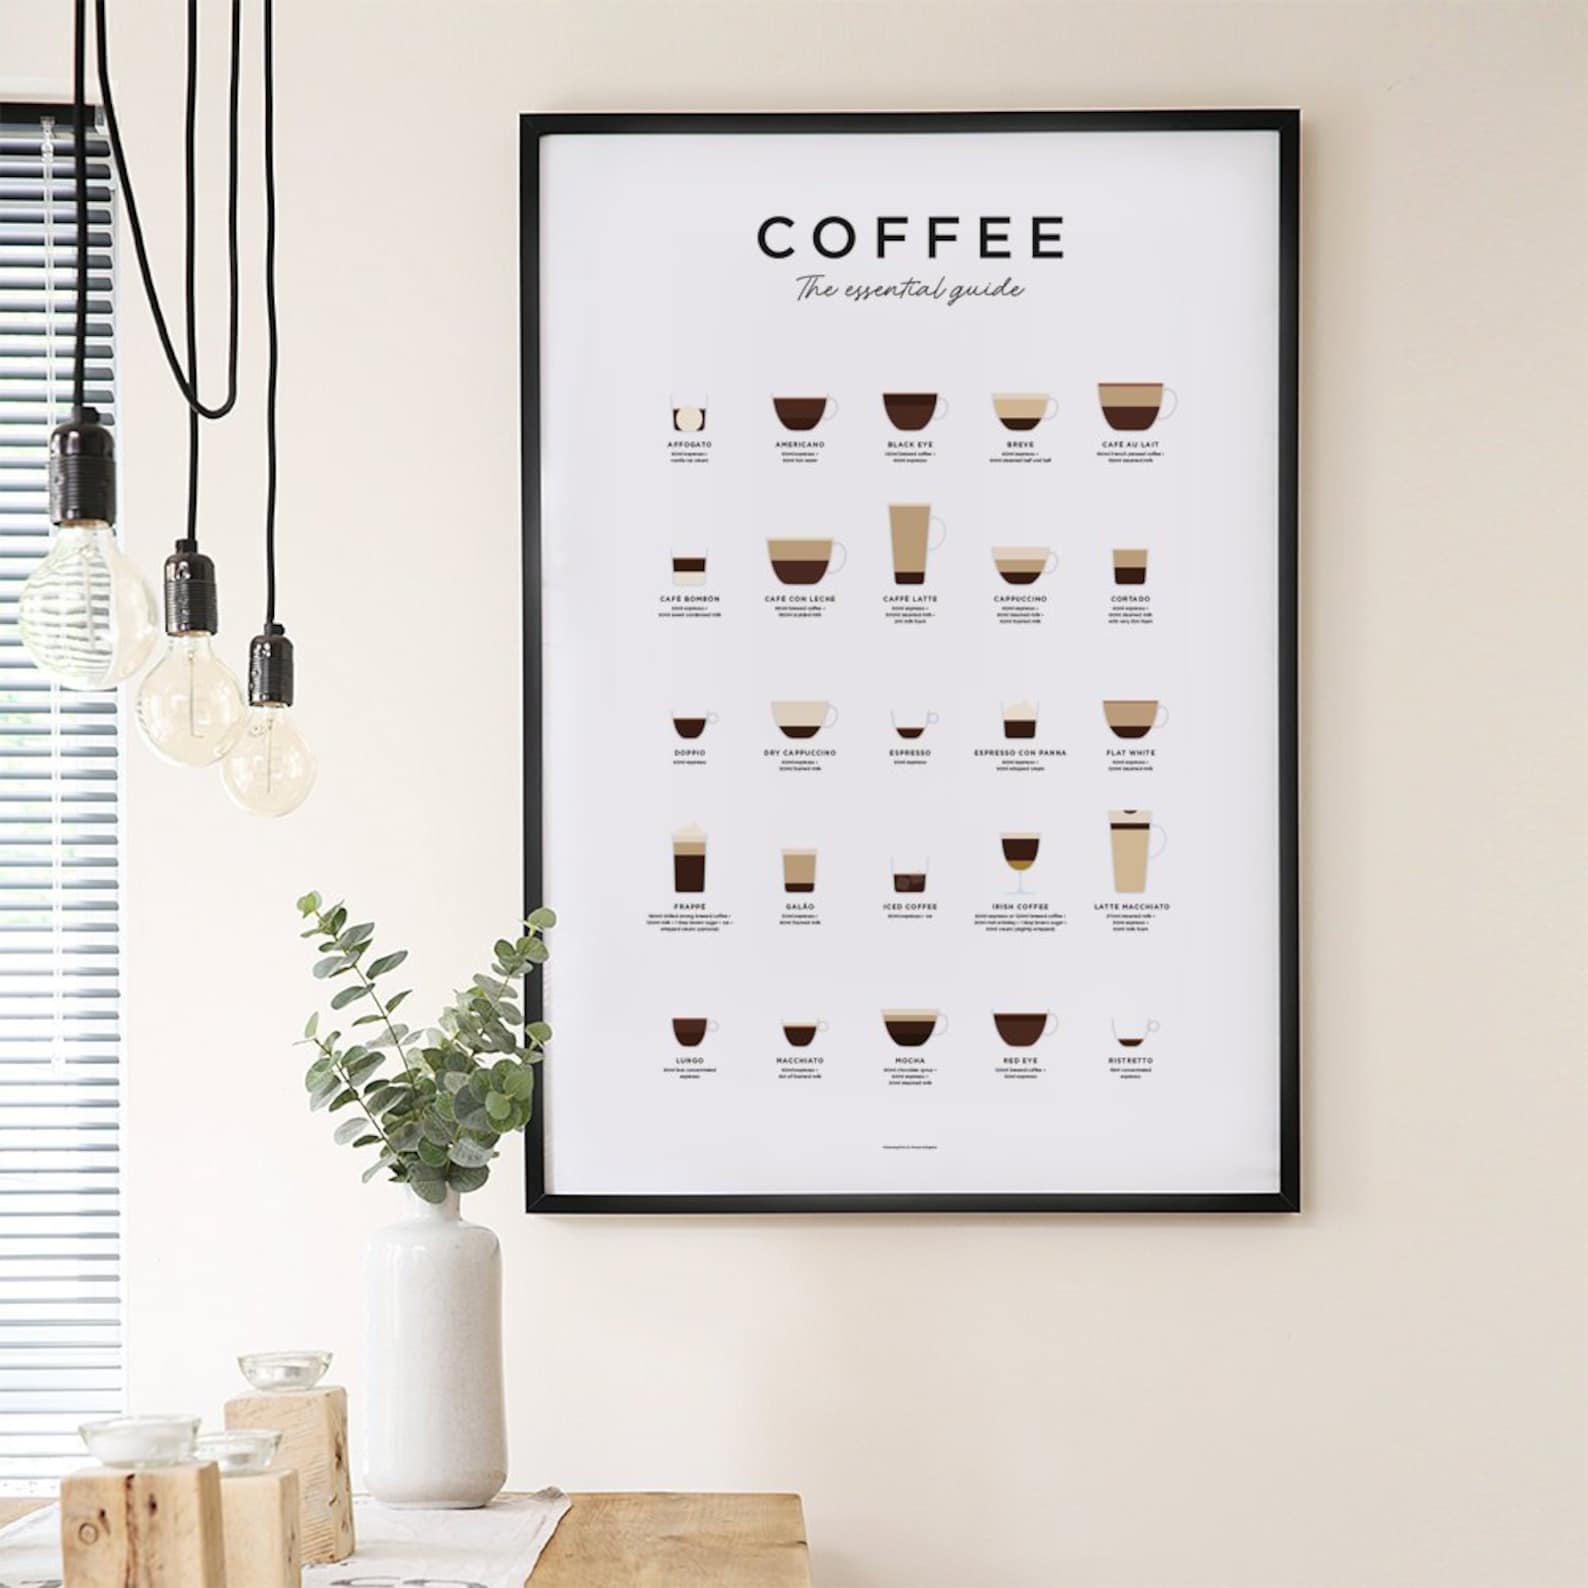 Coffee Tech: 22 Cutting-Edge Gadgets for The Coffee Obsessed